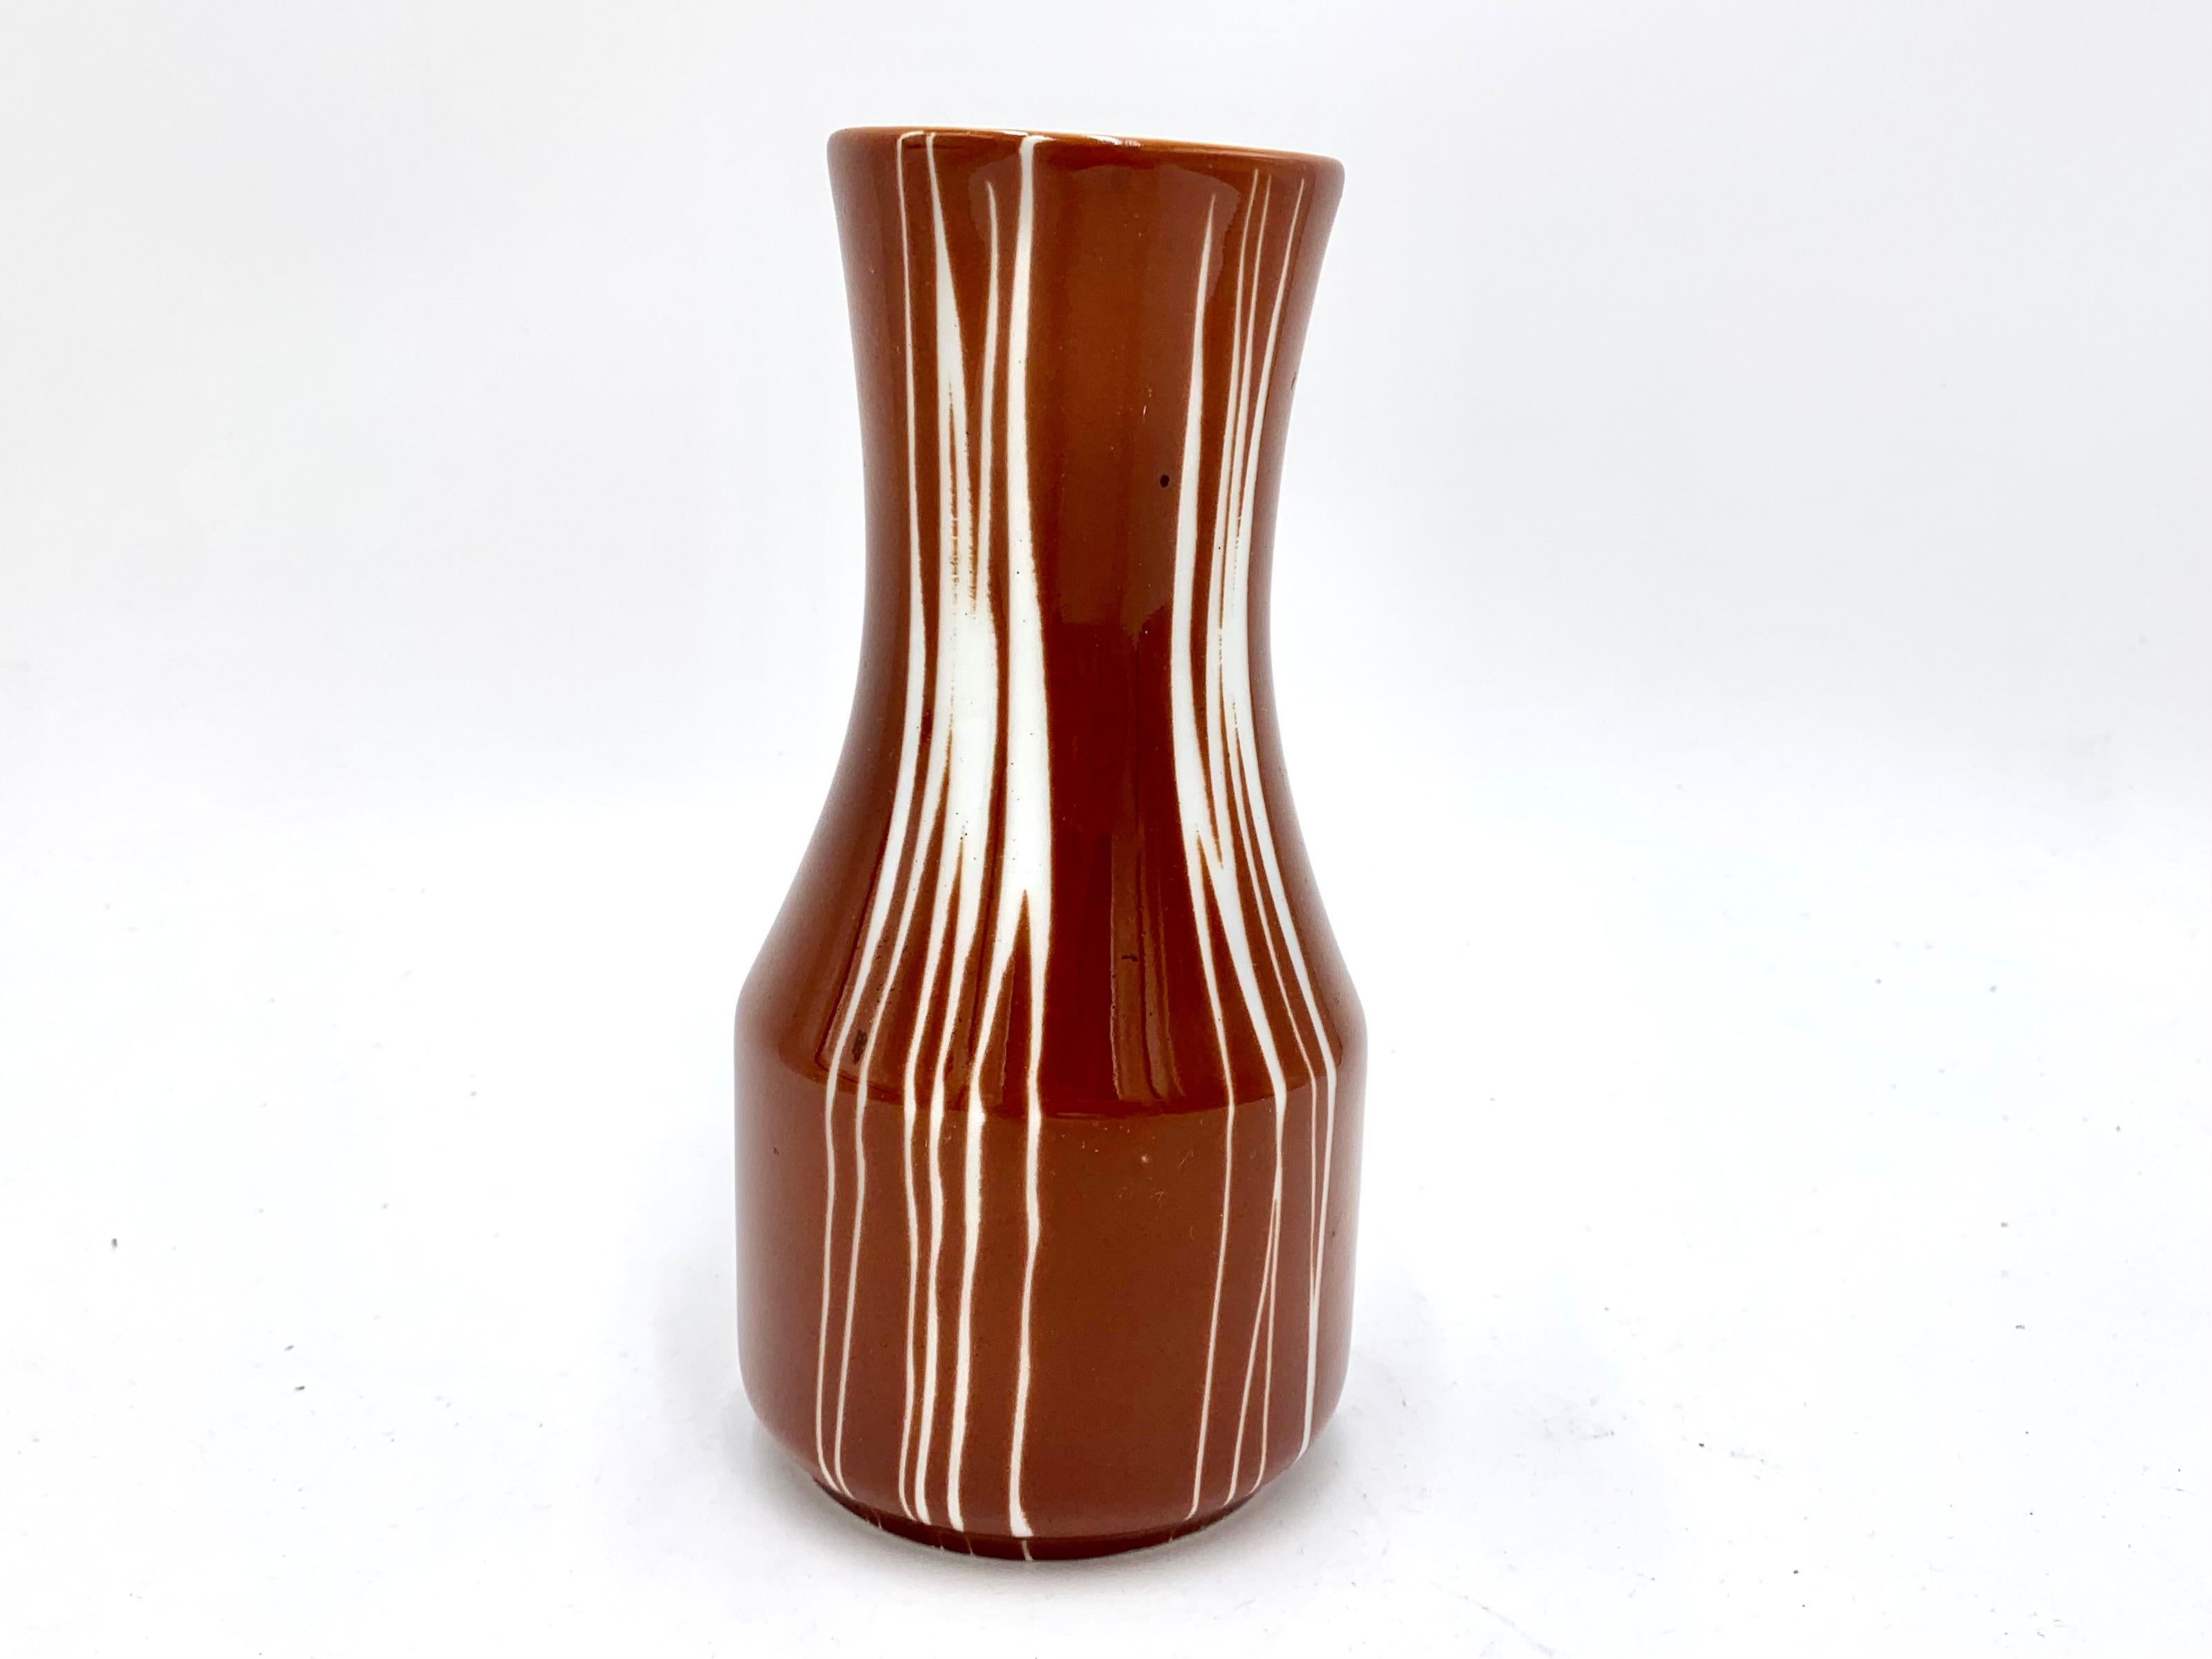 A brown porcelain vase in the New Look style from the 1960s.

Very good condition, no damage.

Height 19cm, diameter 9cm.